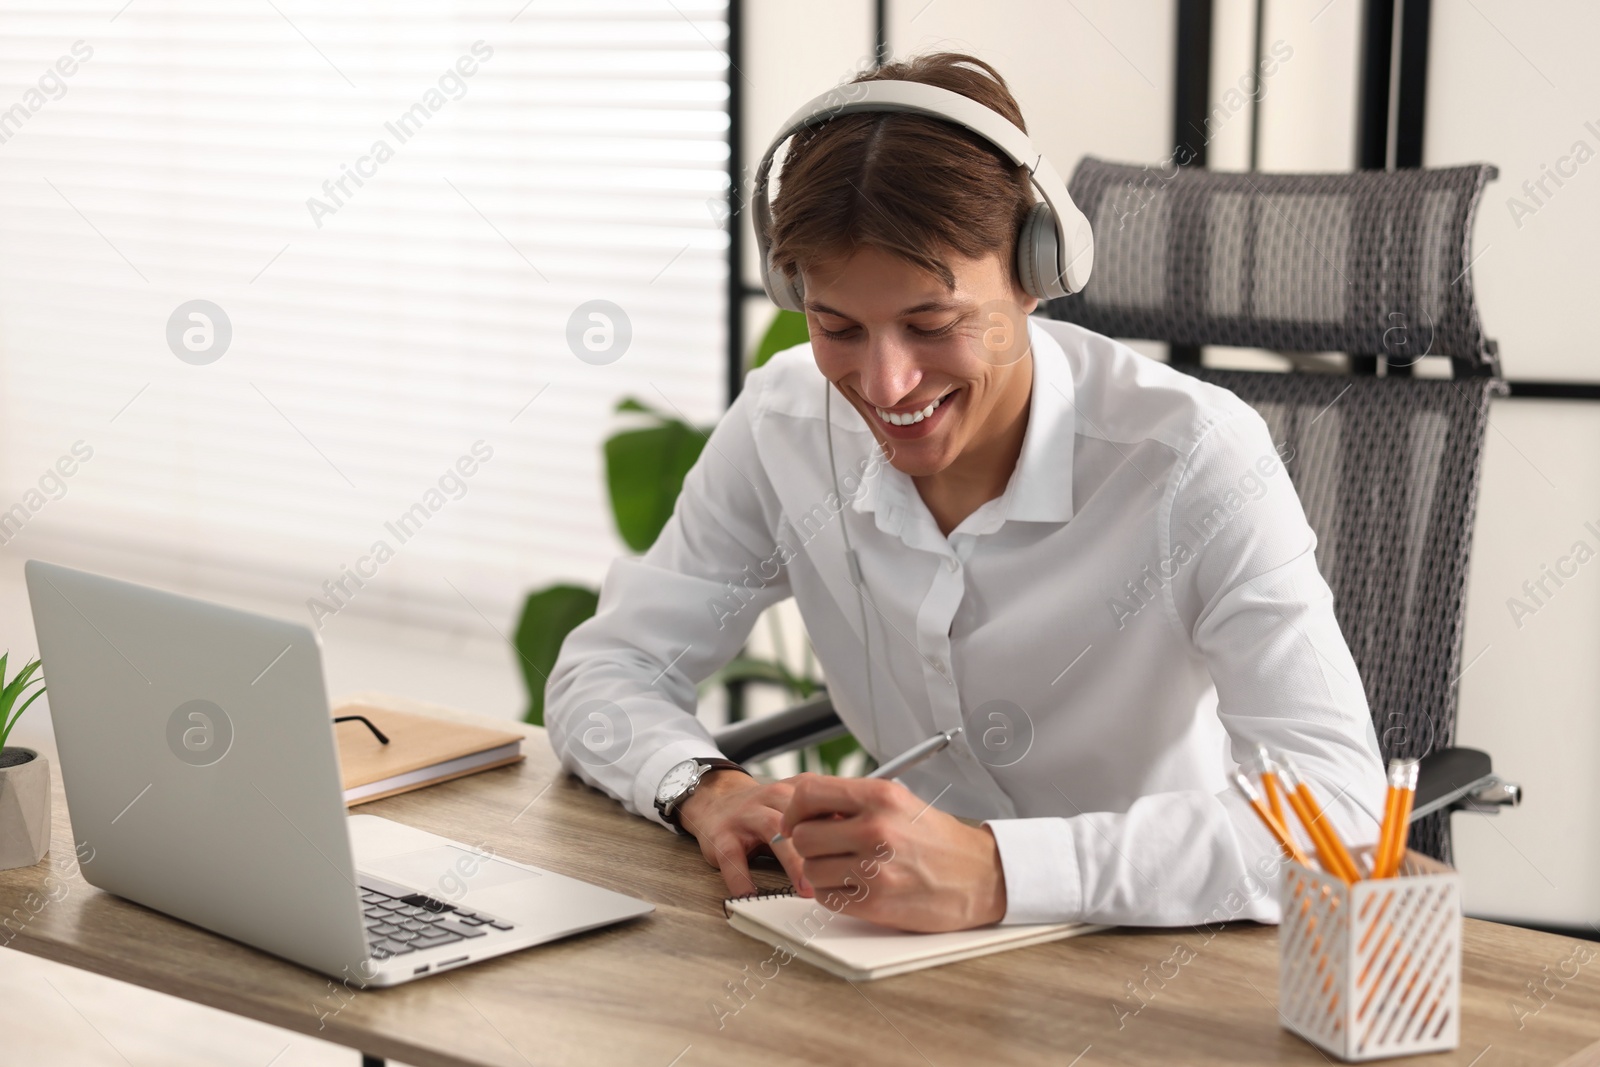 Photo of Man in headphones taking notes during webinar at wooden table indoors